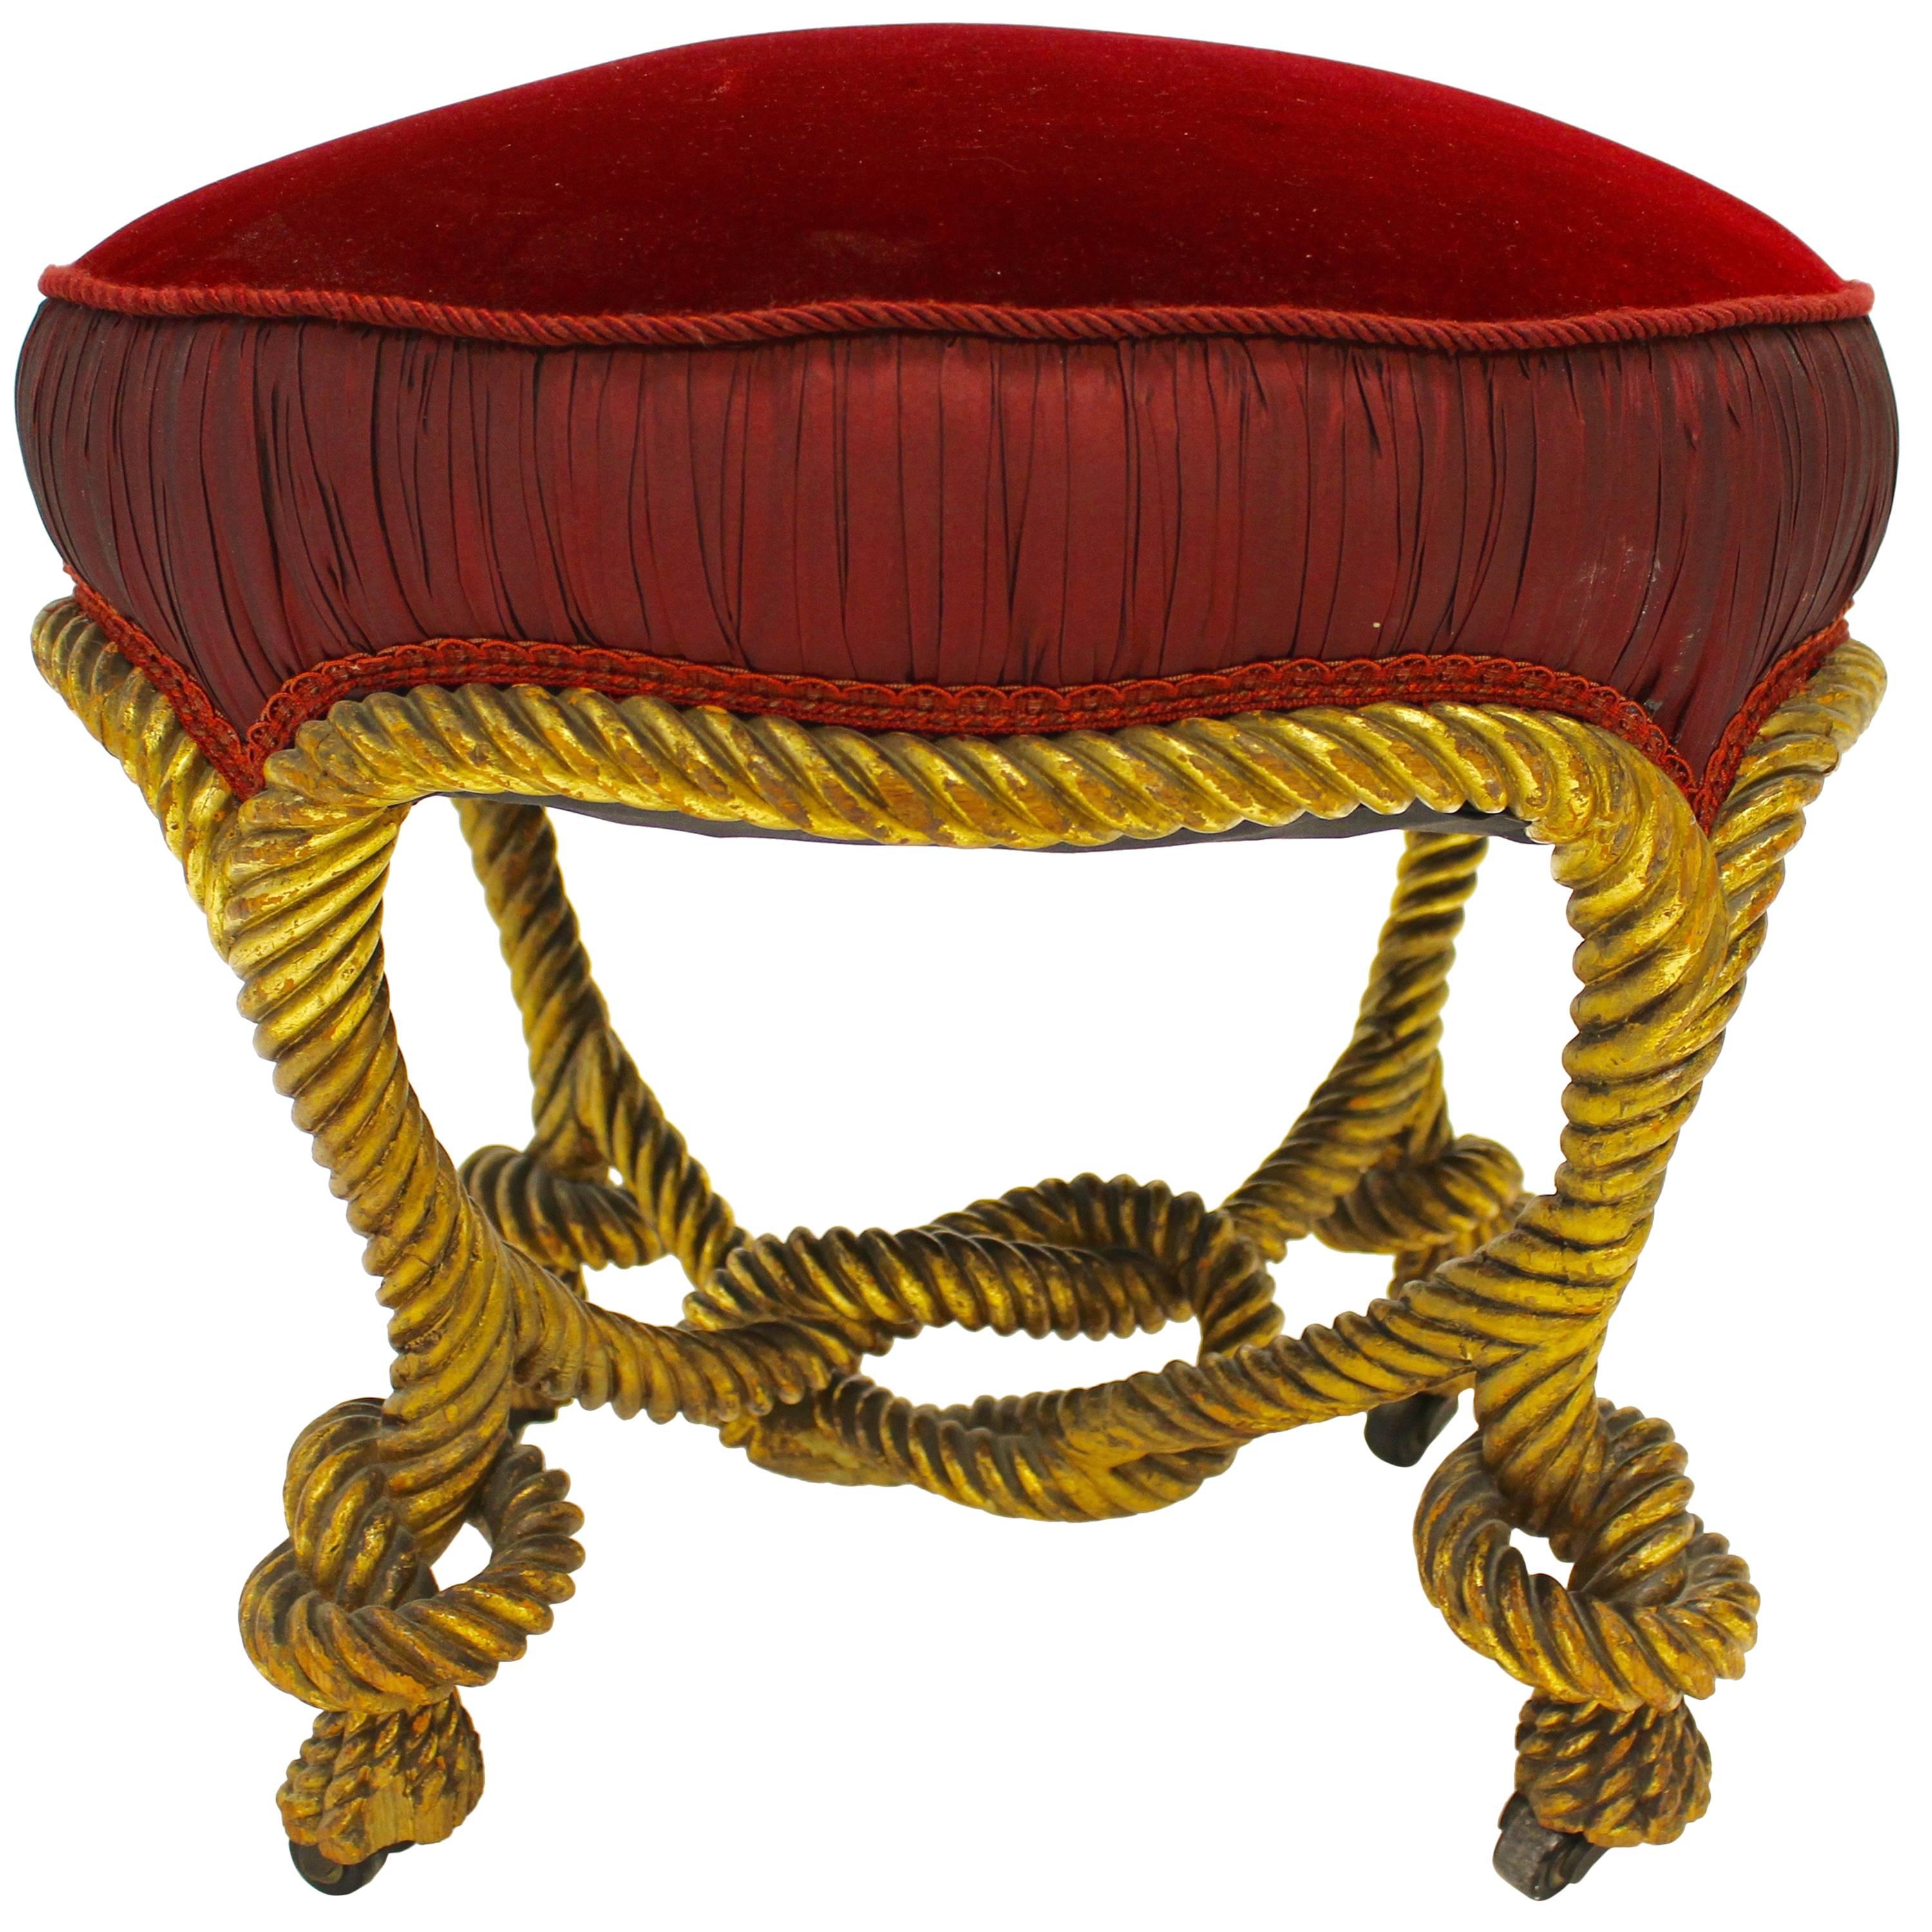 French Napoleon III Style Giltwood Rope Stool with Circular Red Velvet Seat